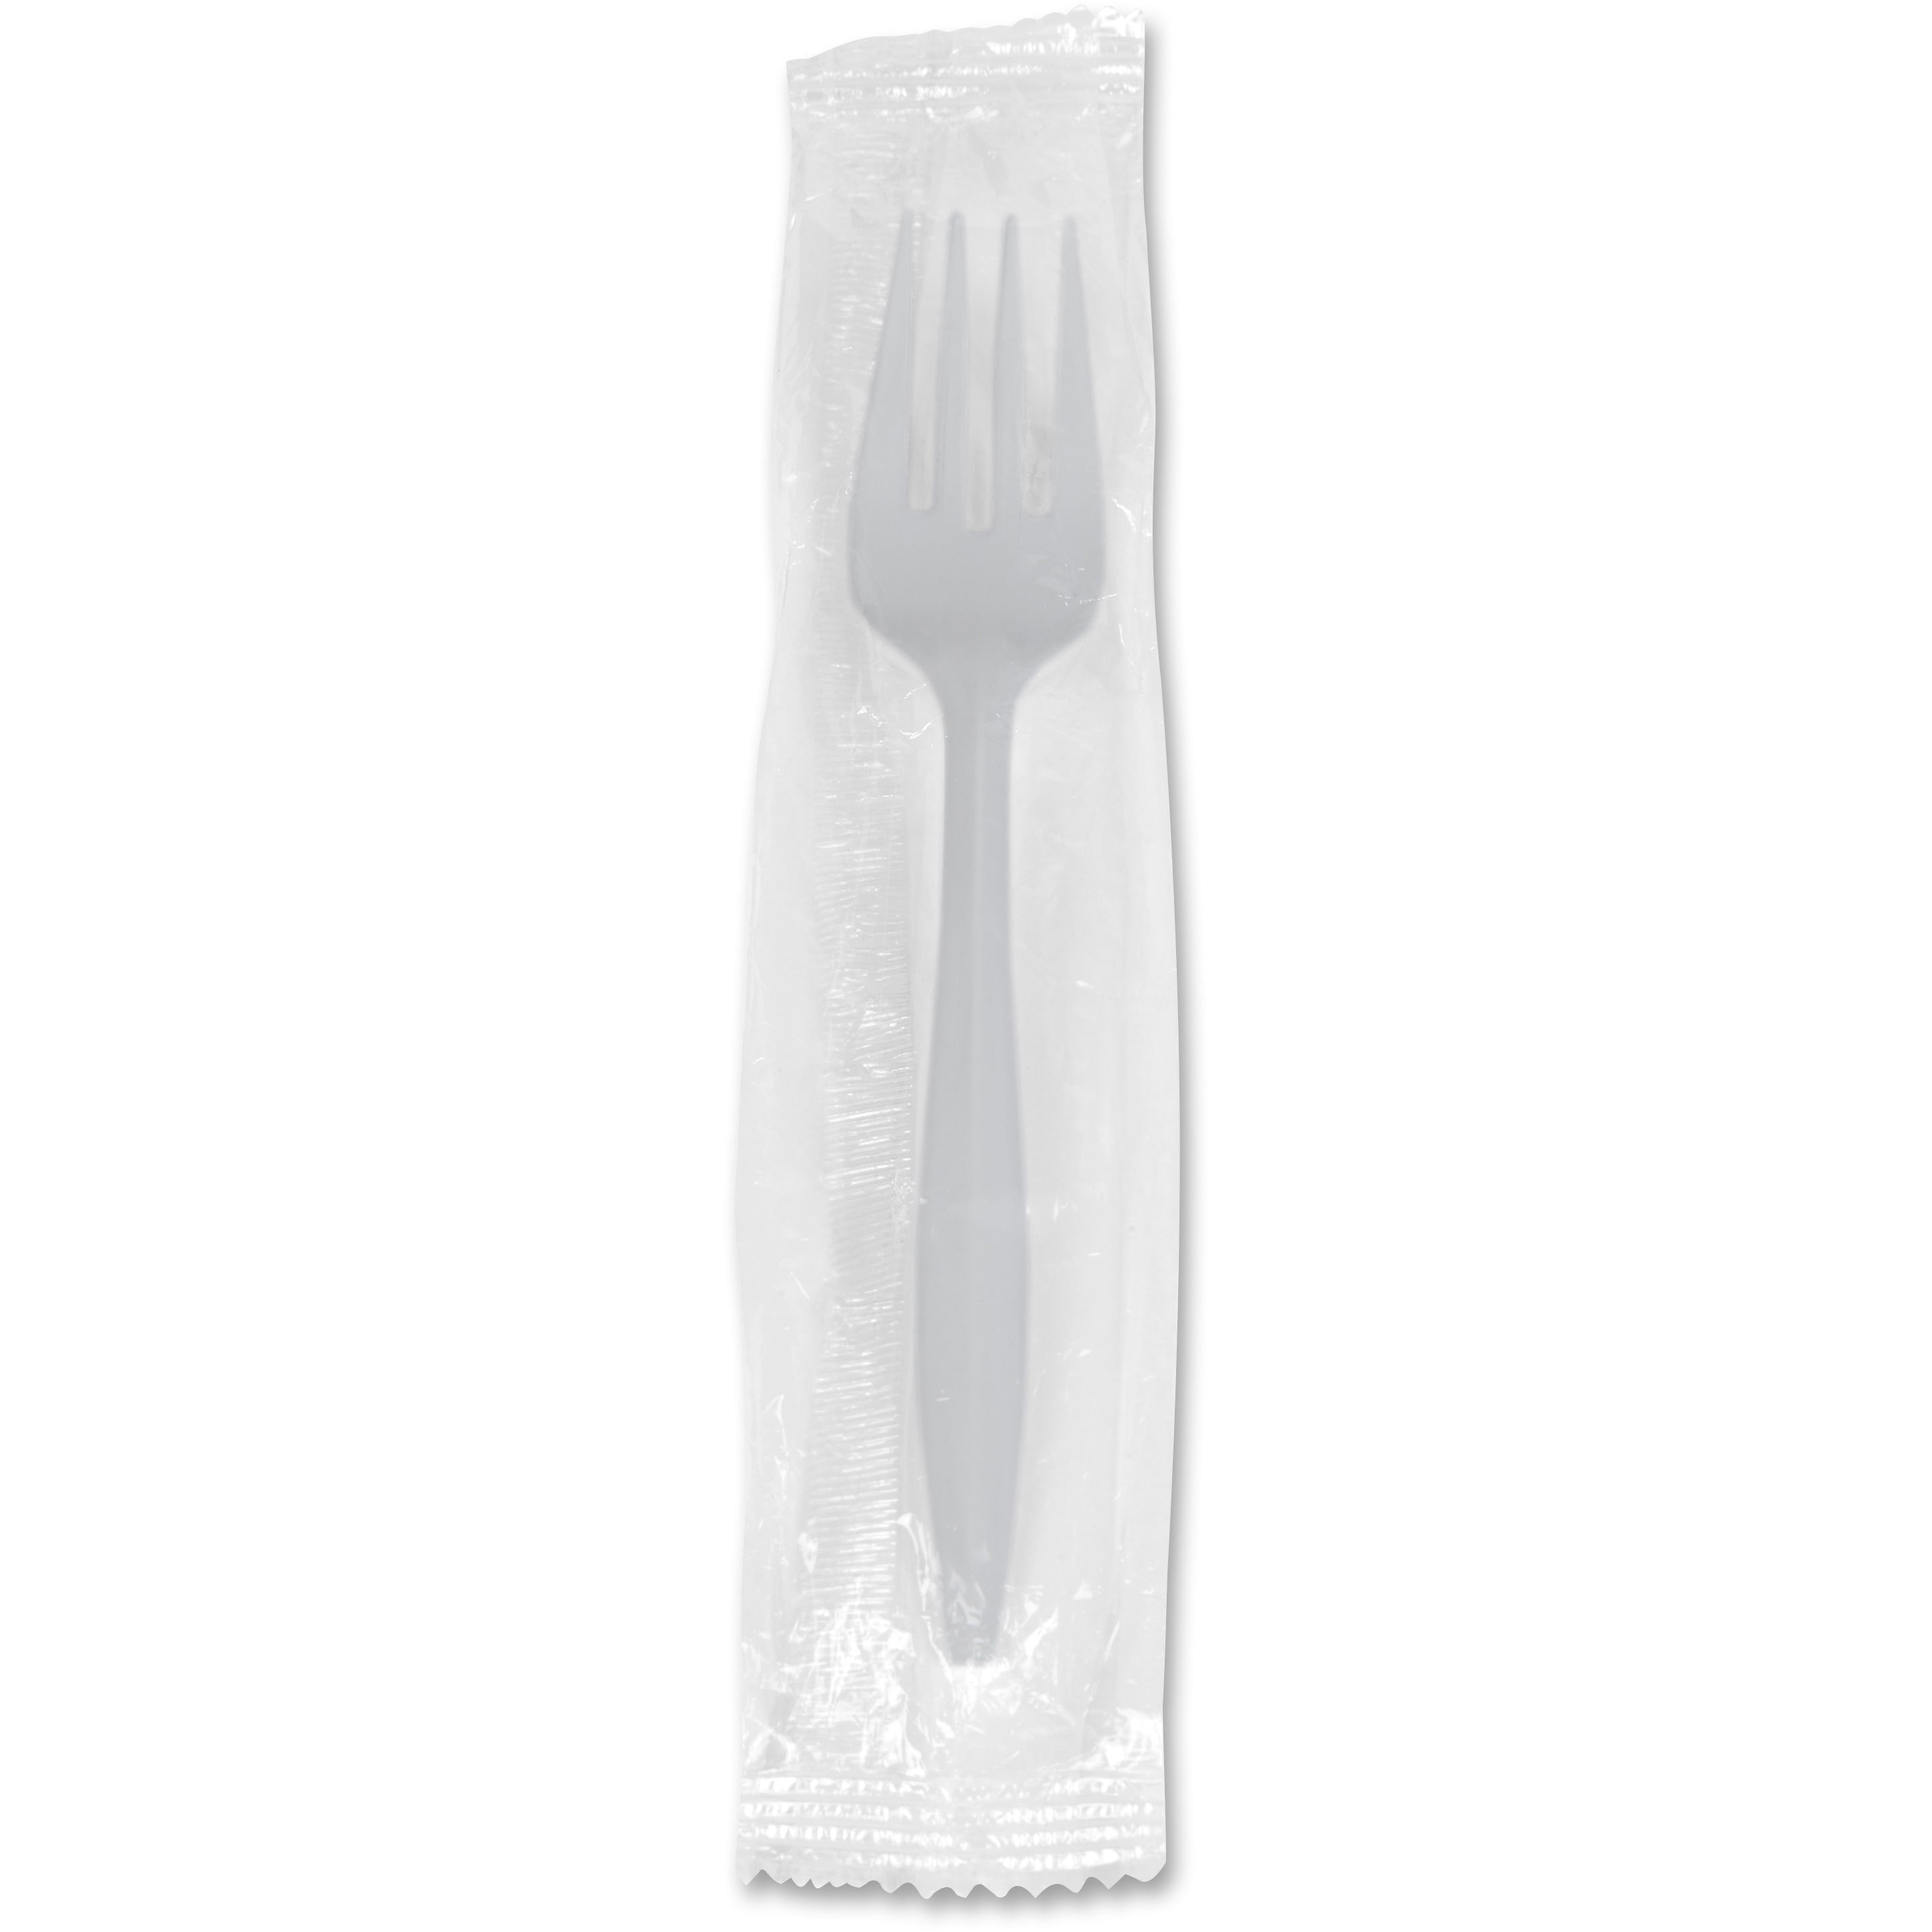 Pack of 1000 Med-Wght Details about   Genuine Joe GJO20007 Plastic Spoons Ind-Wrapped 